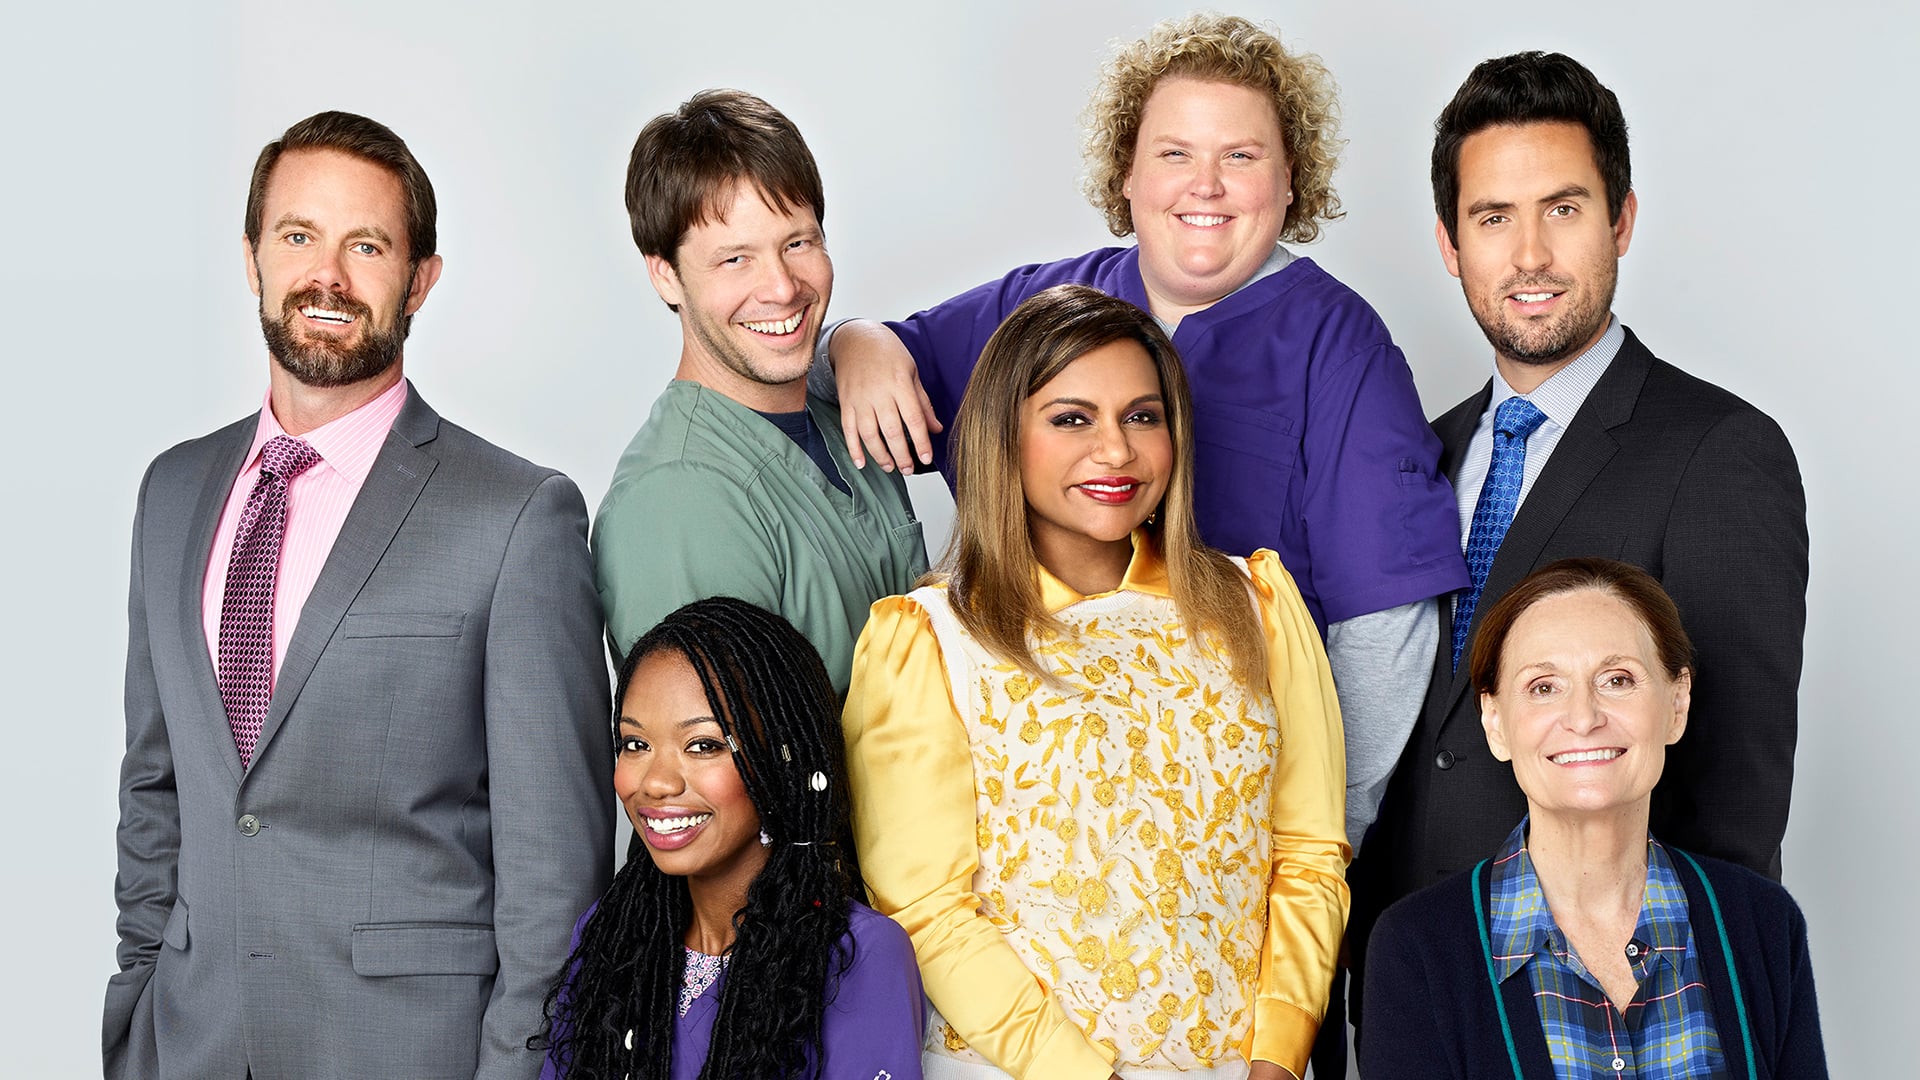 Backdrop Image for The Mindy Project